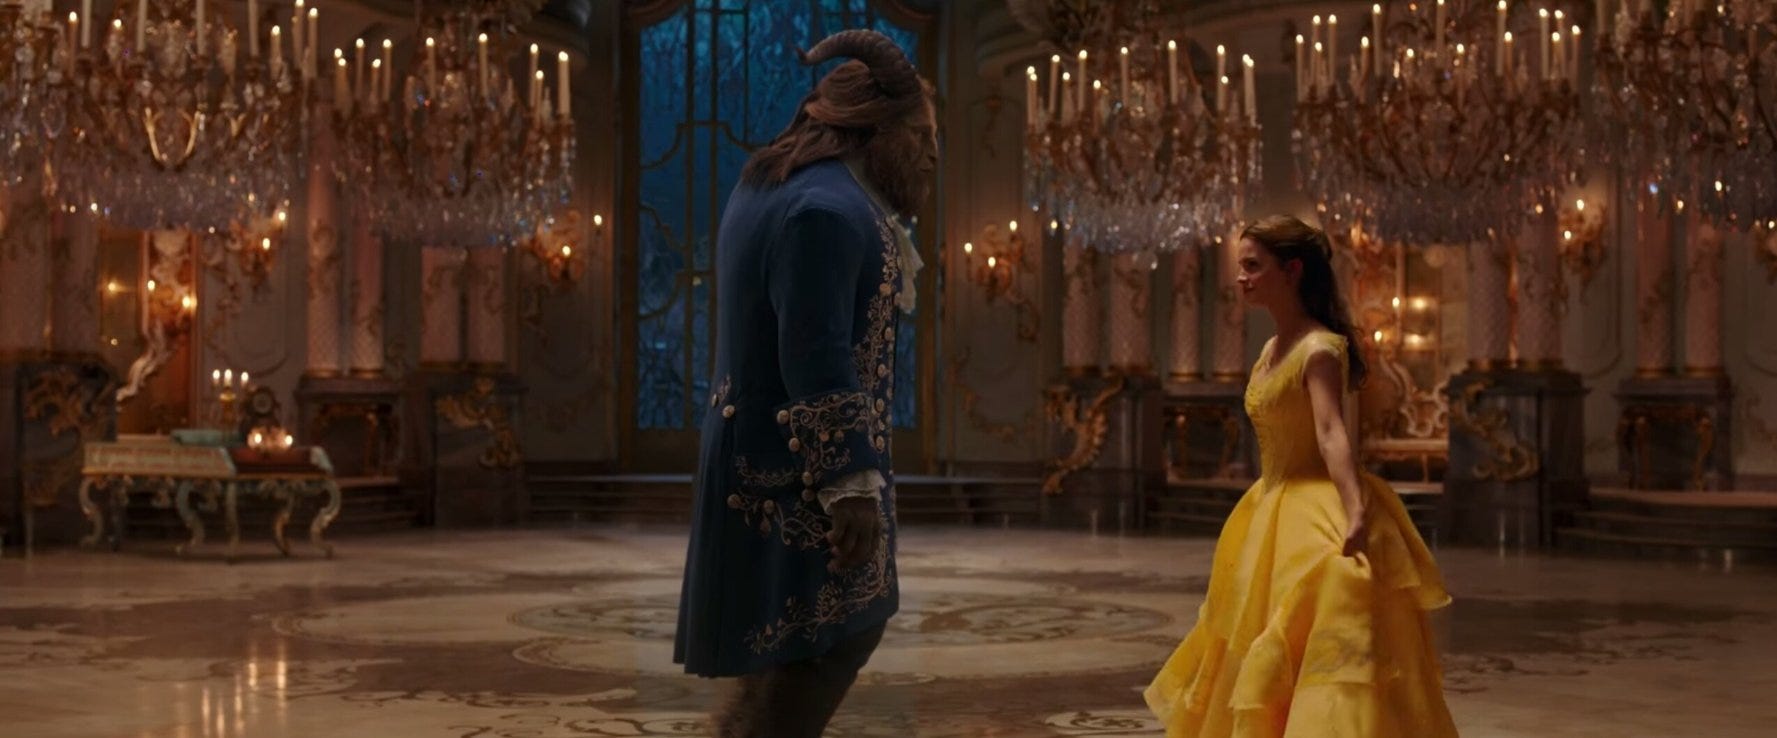 belle and the beast movie review